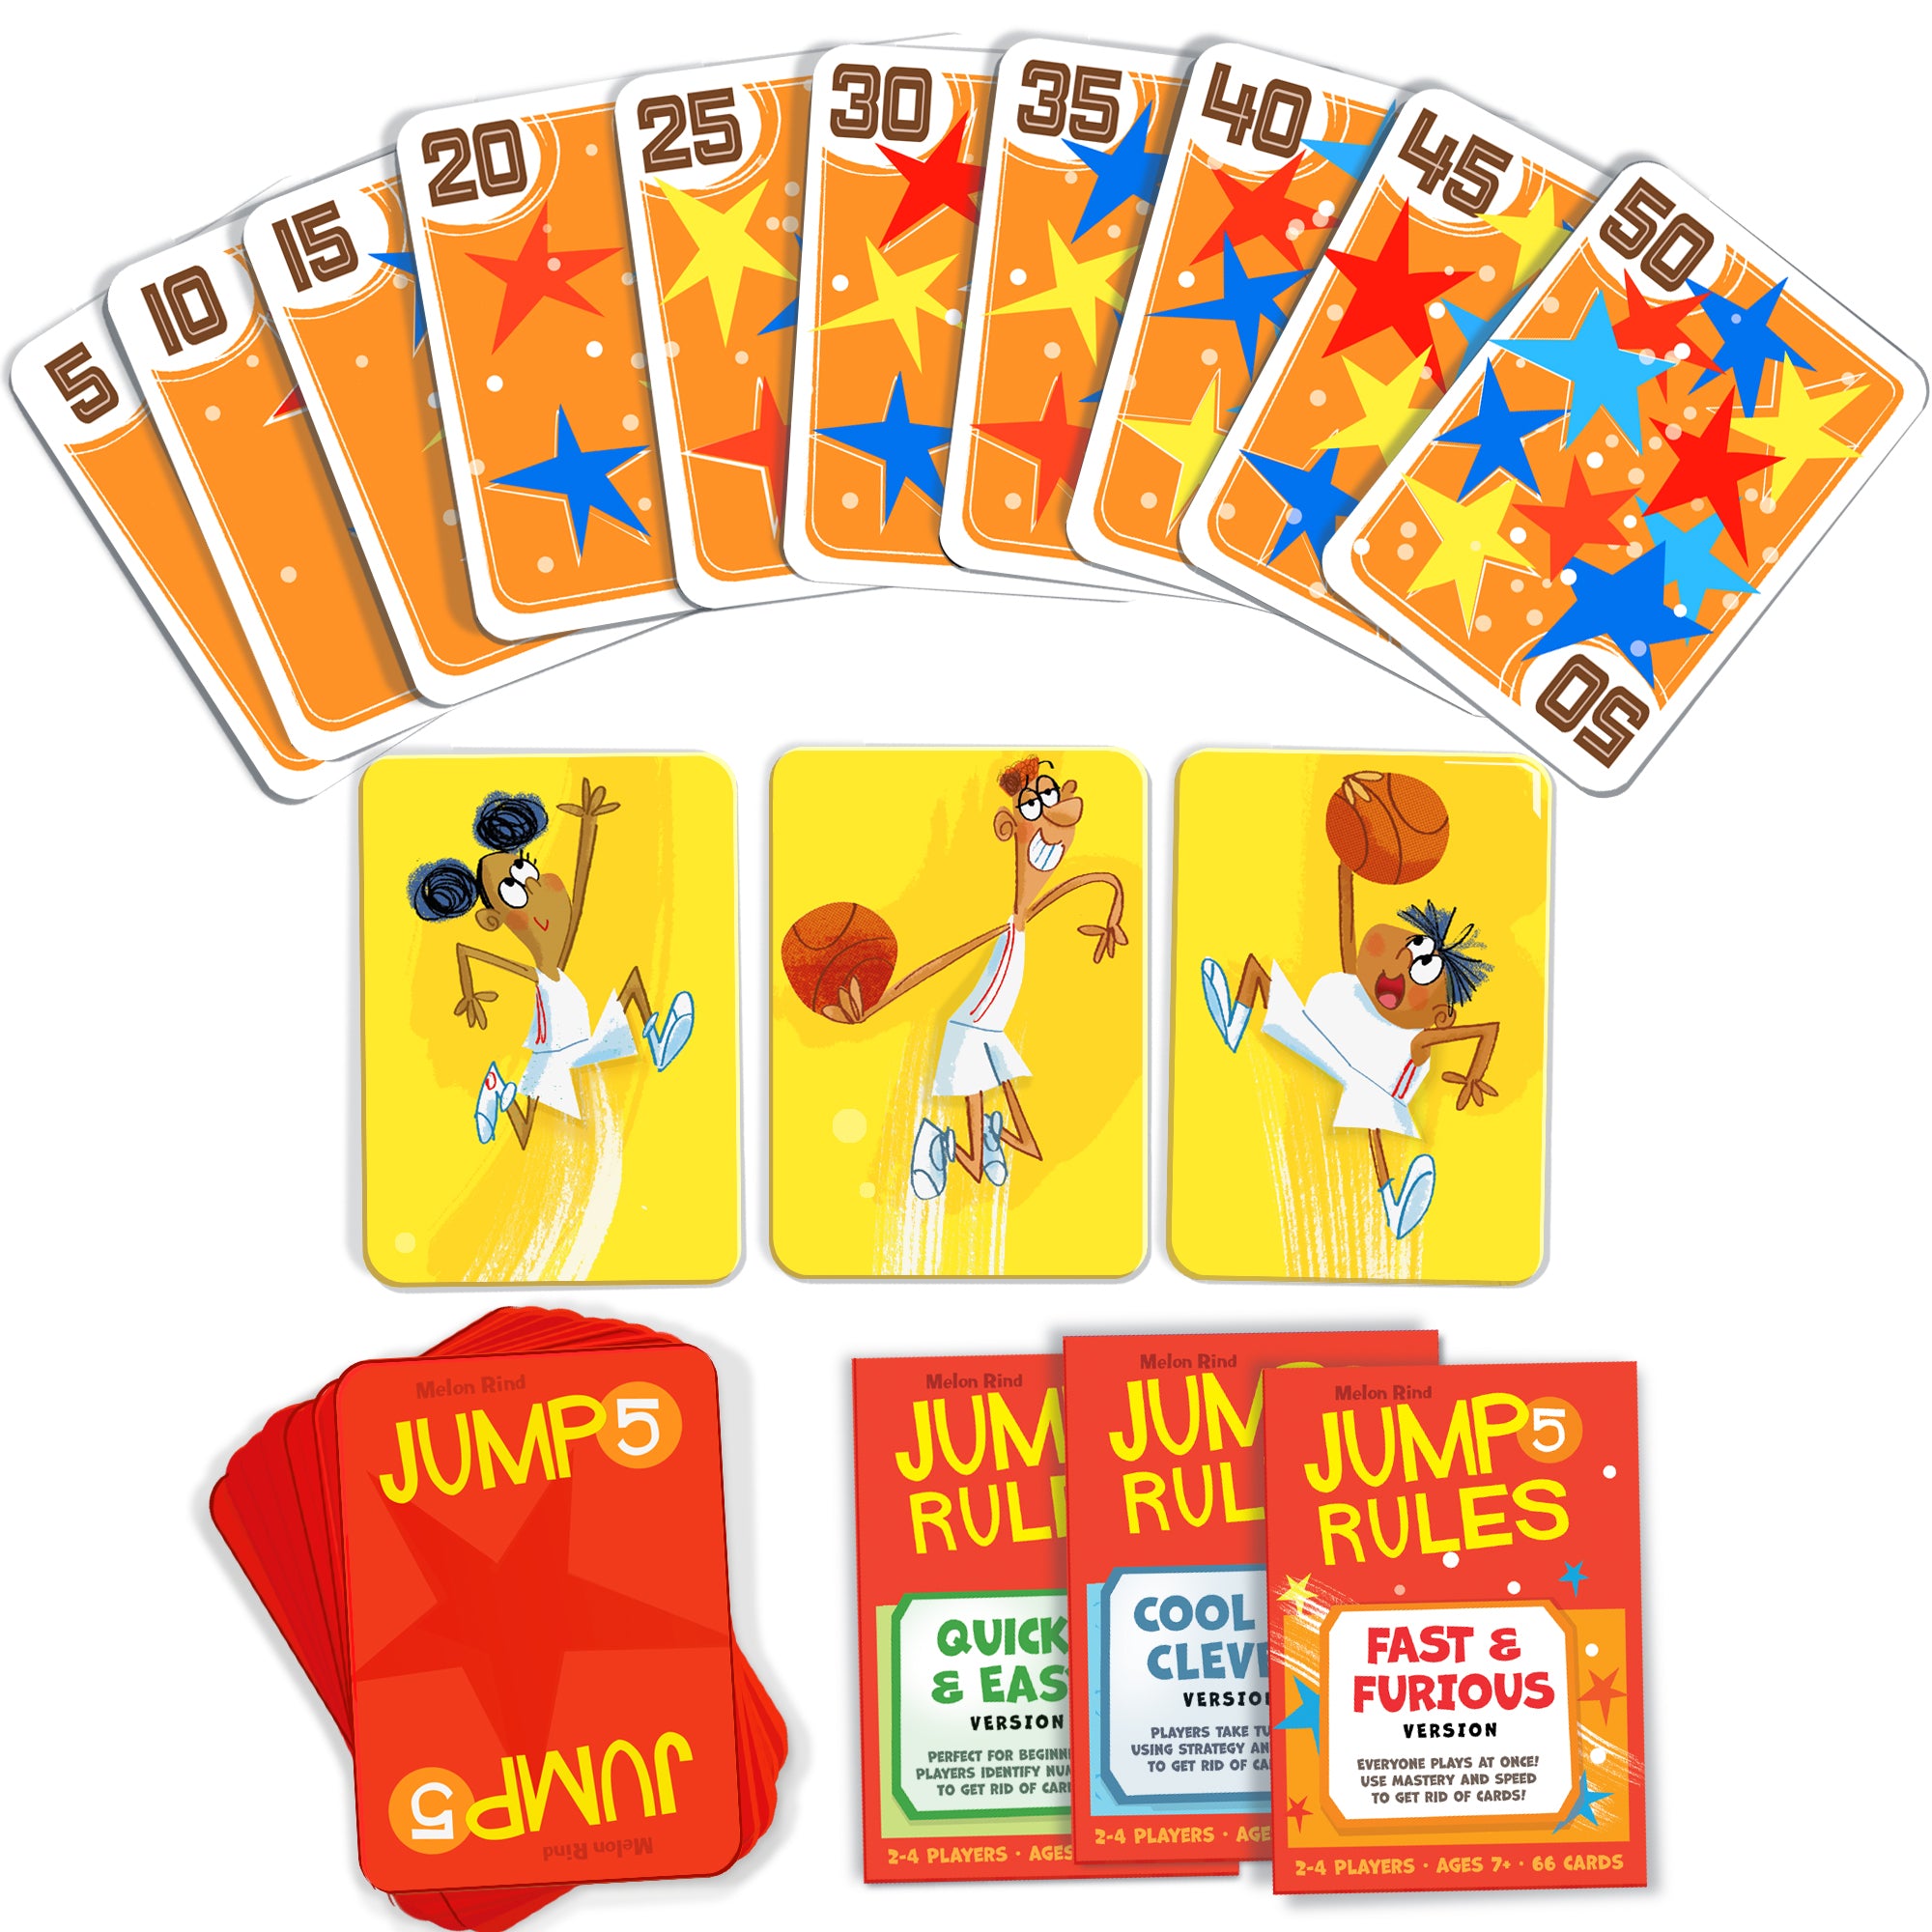 Jump 5 - Multiples of 5 Game